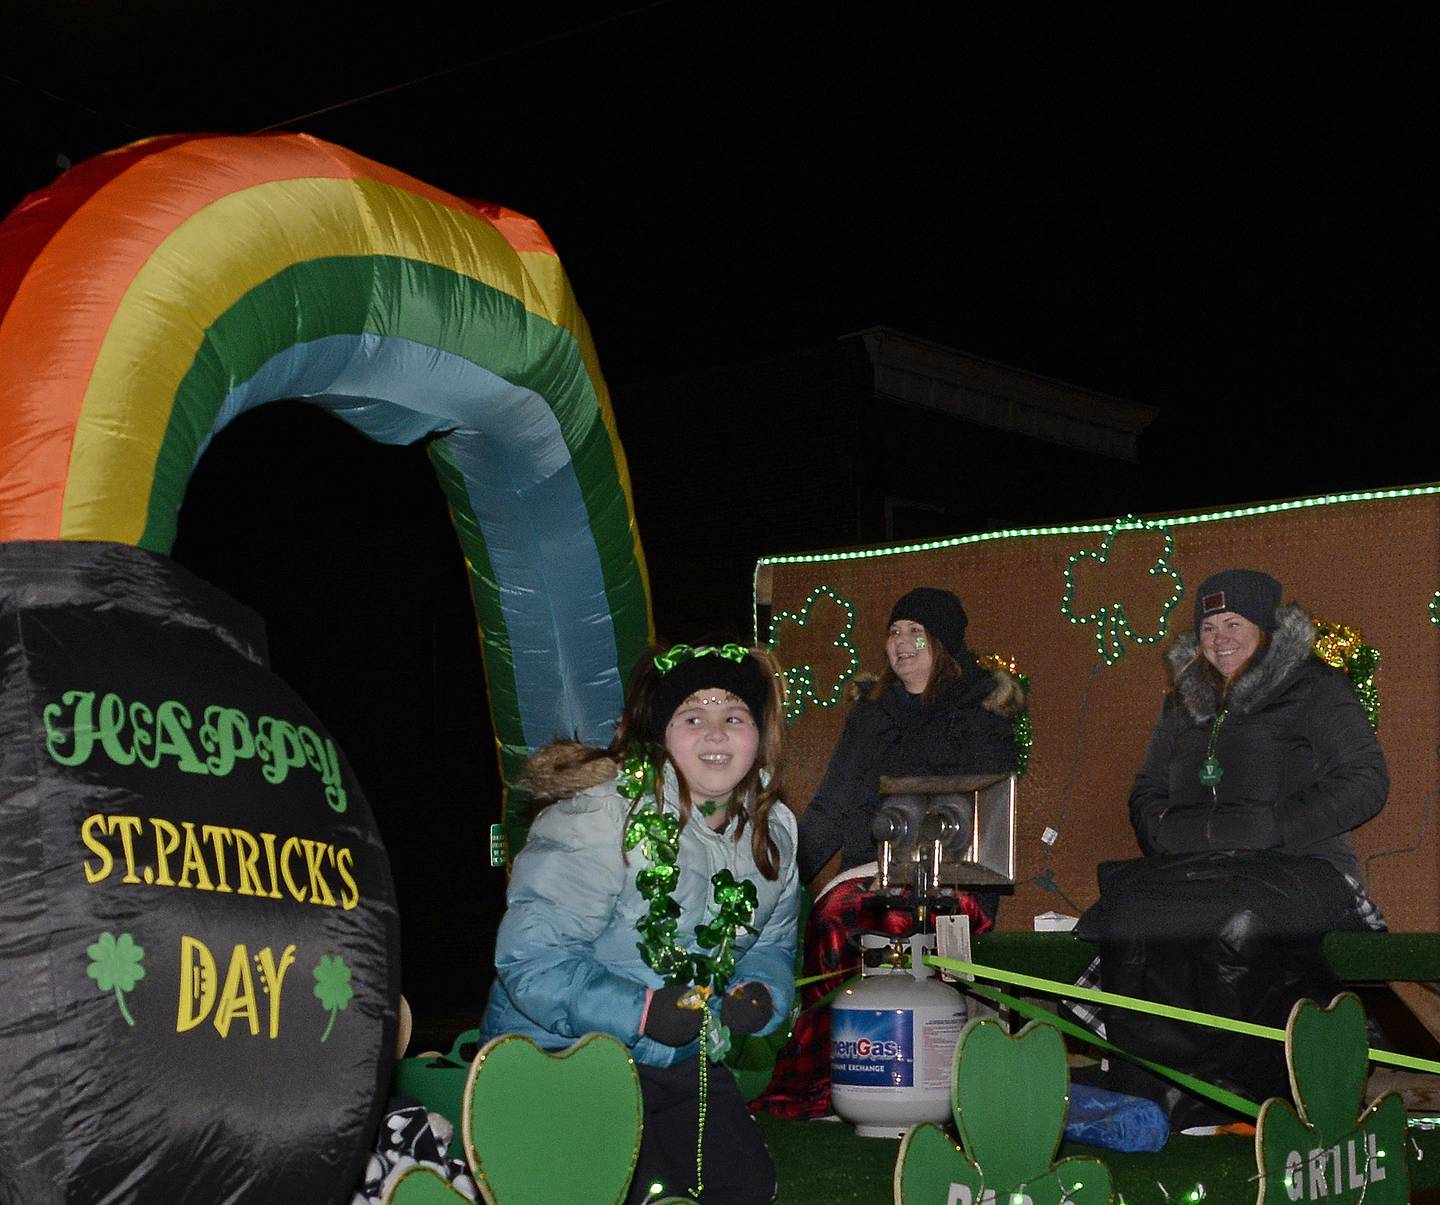 Those riding on the Ziggy’s float work to stay warm during the lighted St Patrick’s Day Parade Saturday, March 12, 2022, in Marseilles.